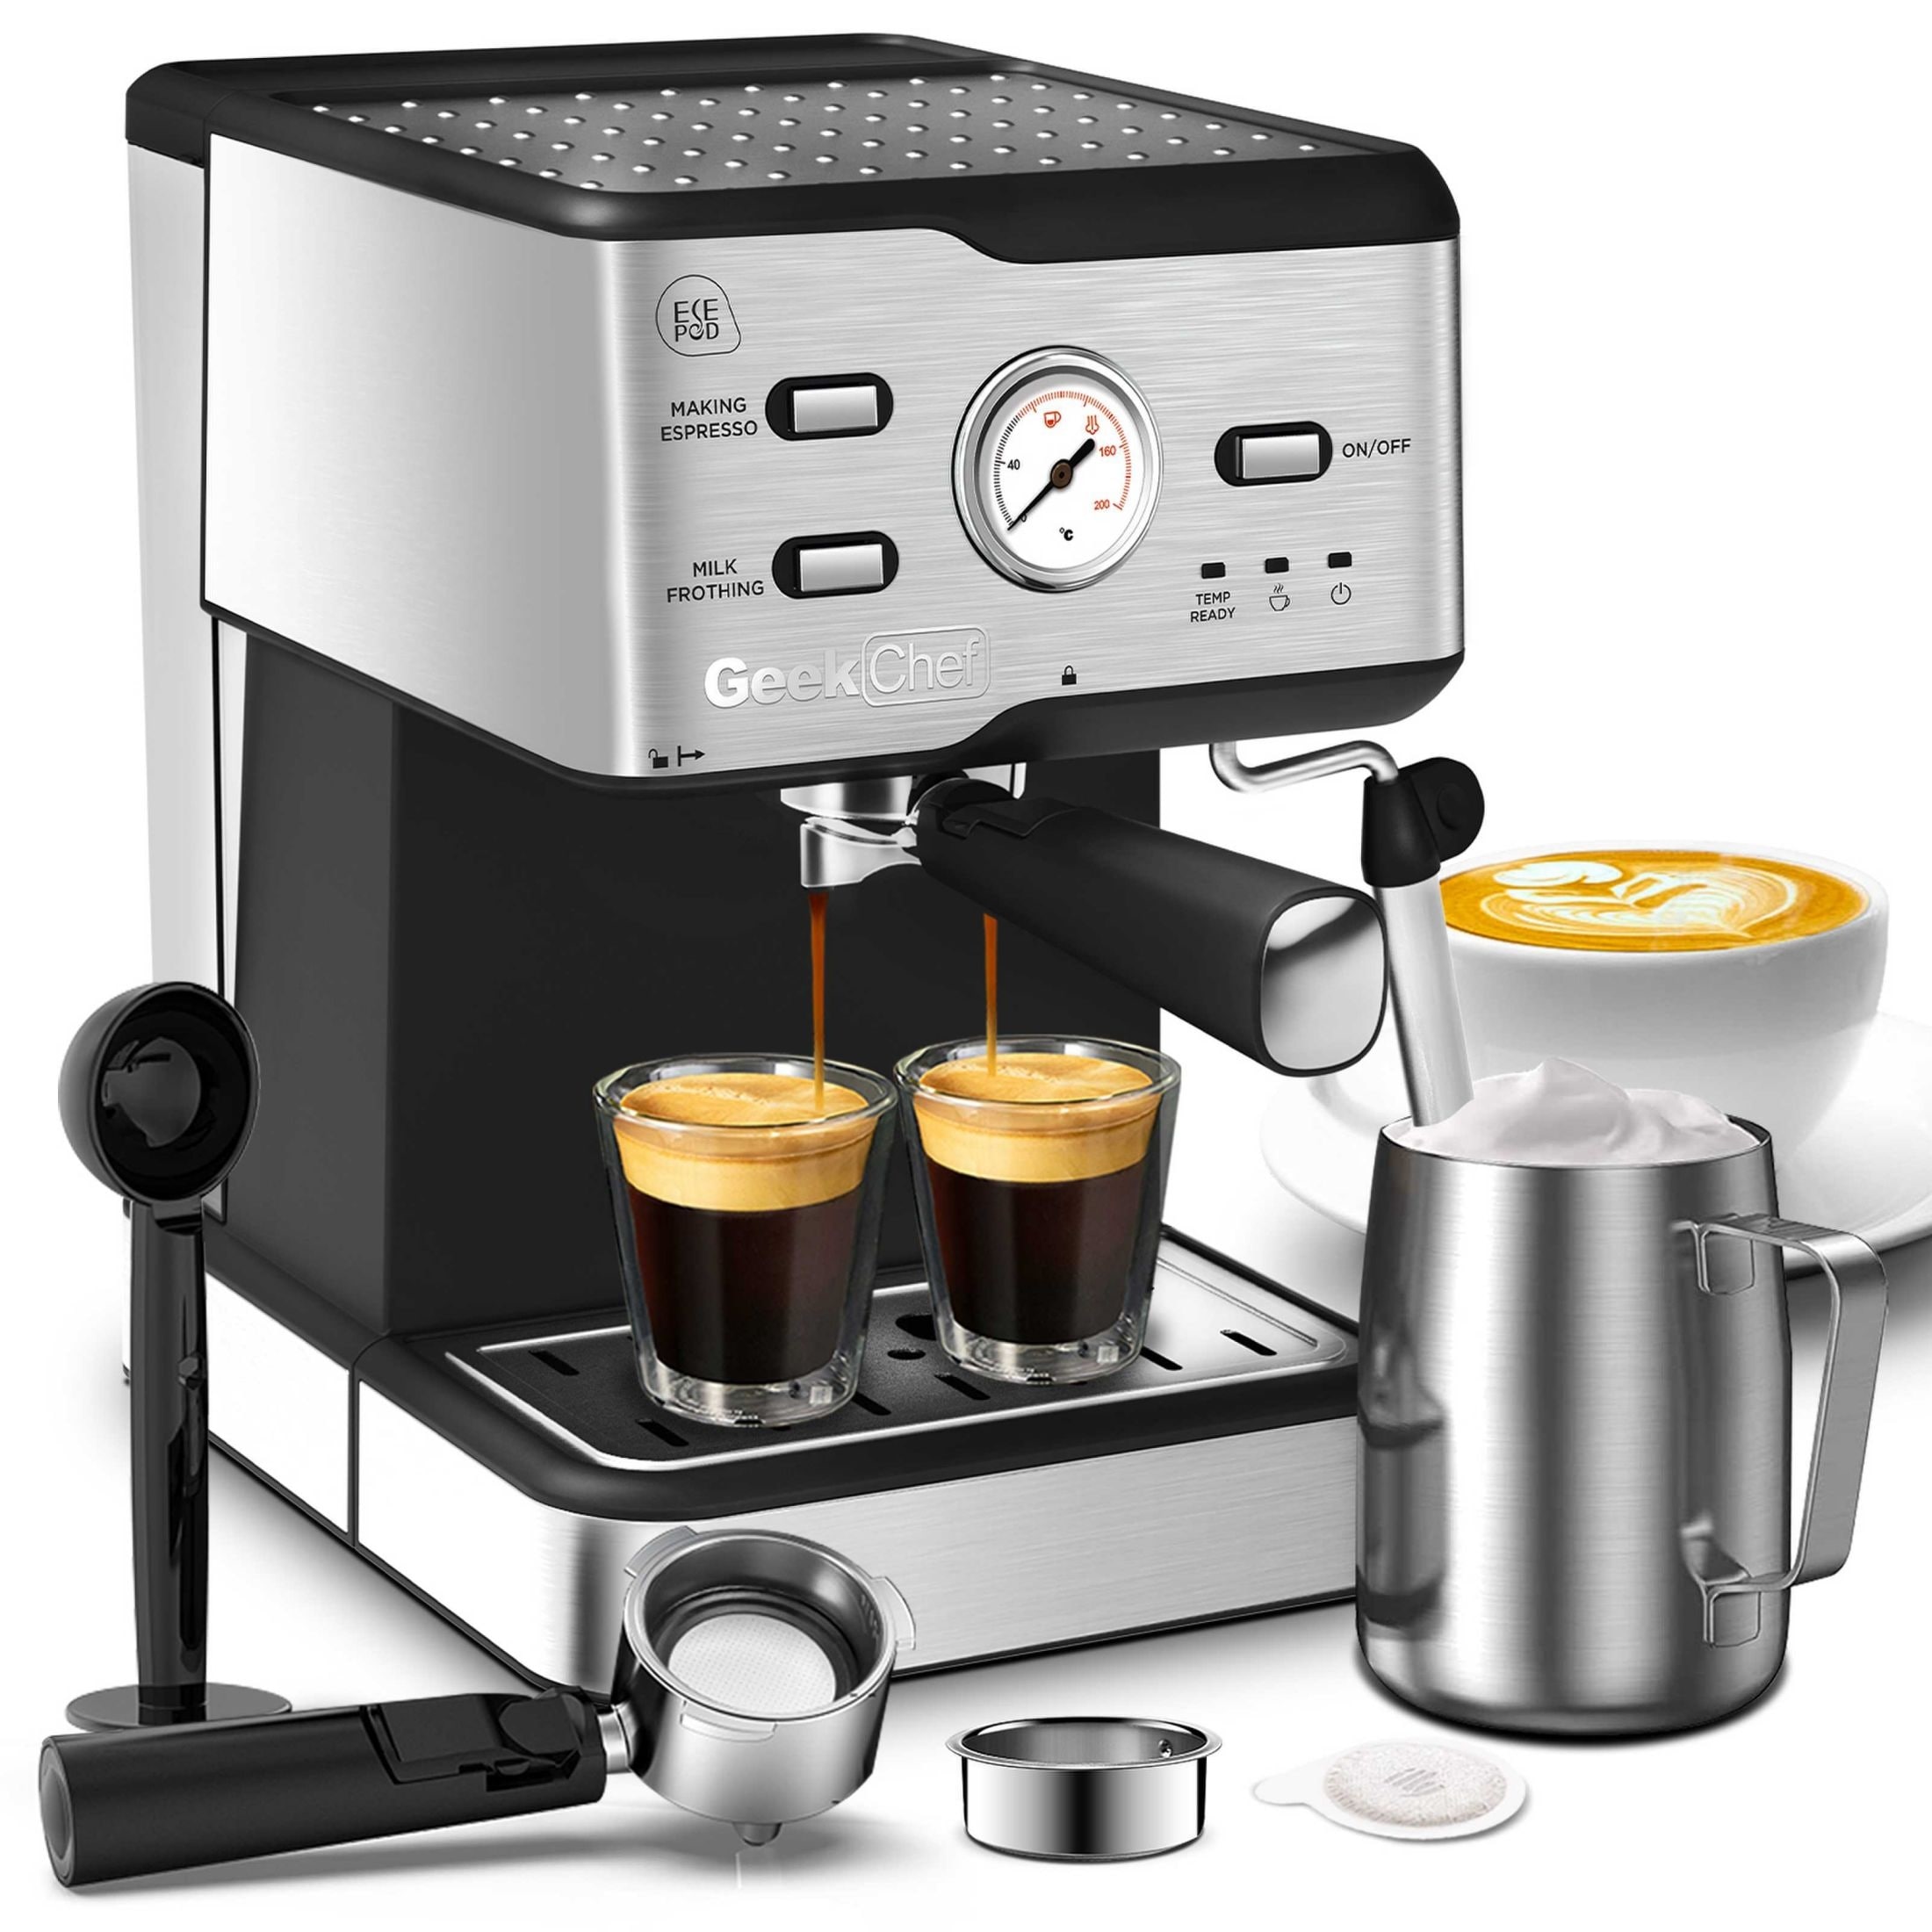 https://ak1.ostkcdn.com/images/products/is/images/direct/6b51da094f52c6a64829cdc7f04b063860a27fe5/20-Bar-Espresso-Machine-with-ESE-POD-Filter-%26-Milk-Frother---High-Pressure-Pump-for-Fine-Extraction.jpg